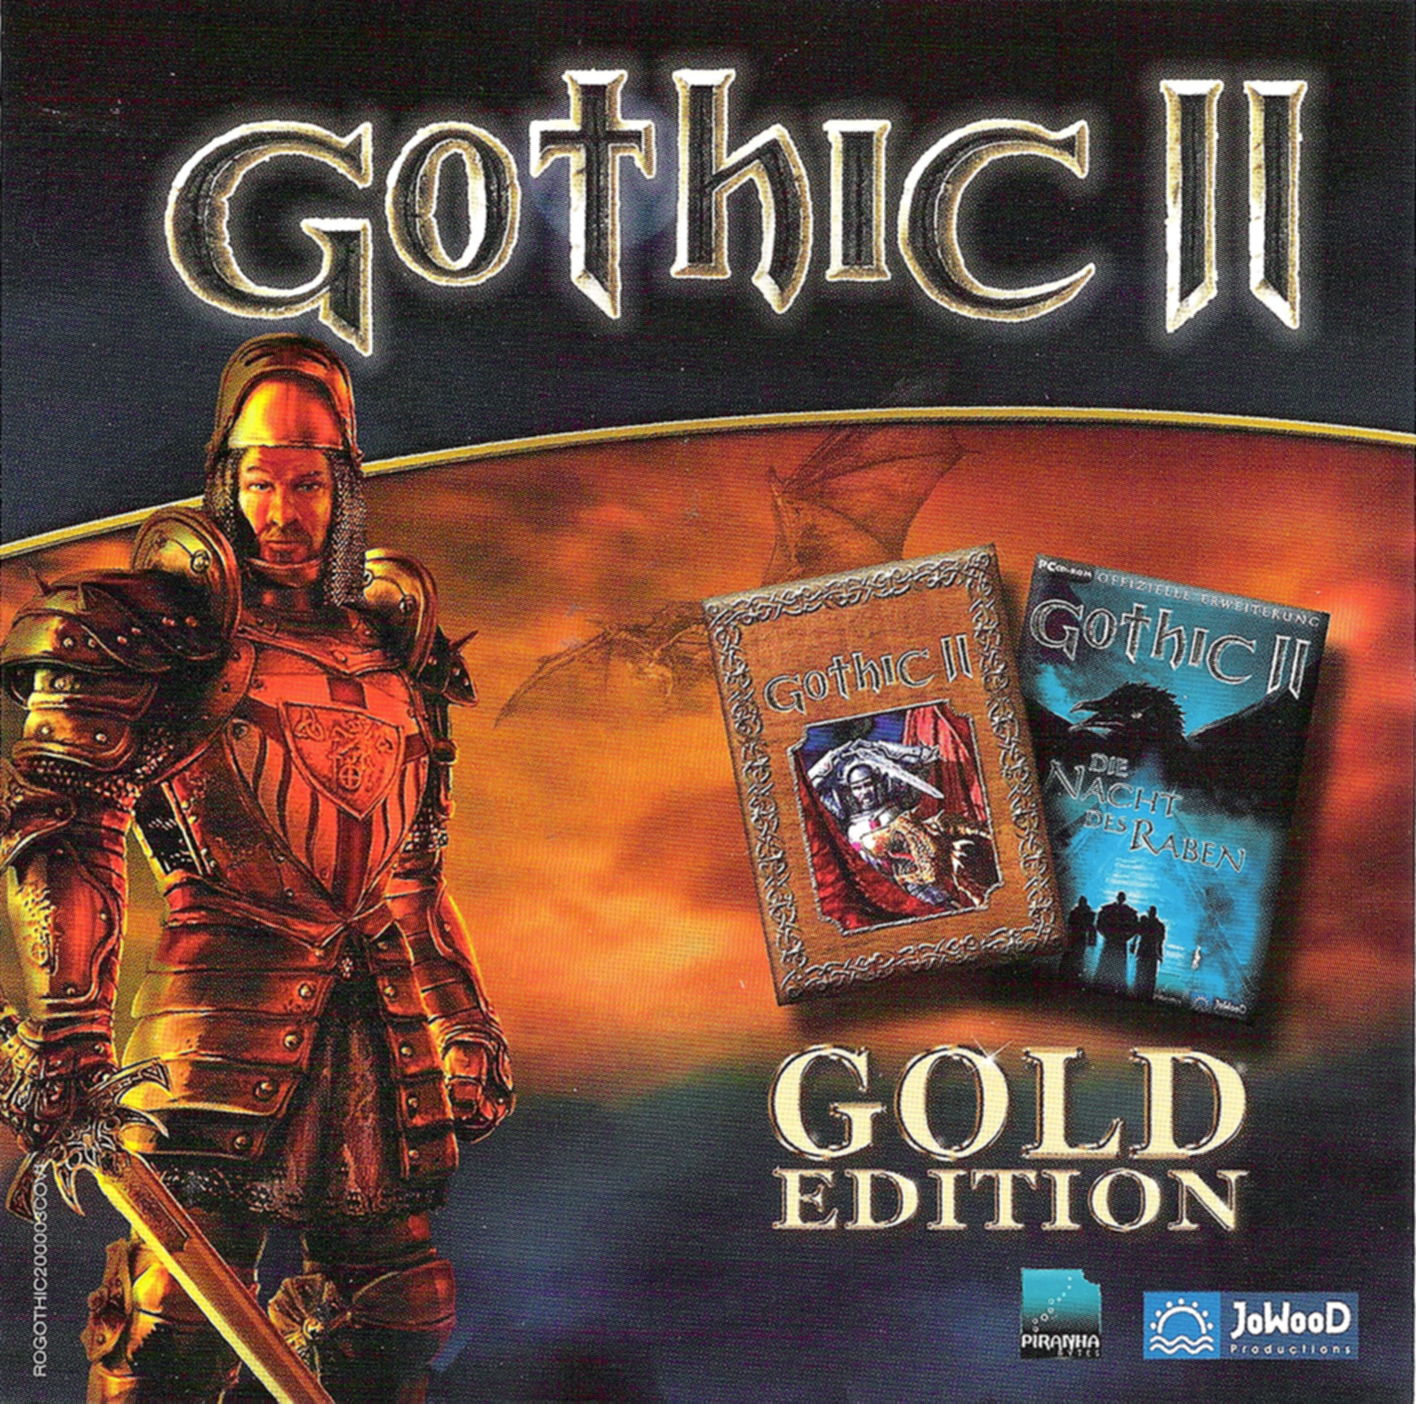 Gold 2 отзывы. Готика 2 золотое издание. Gothic 2 Gold #1. Готика 2 Gold диск. Gothic 2 Gold Edition DVD.